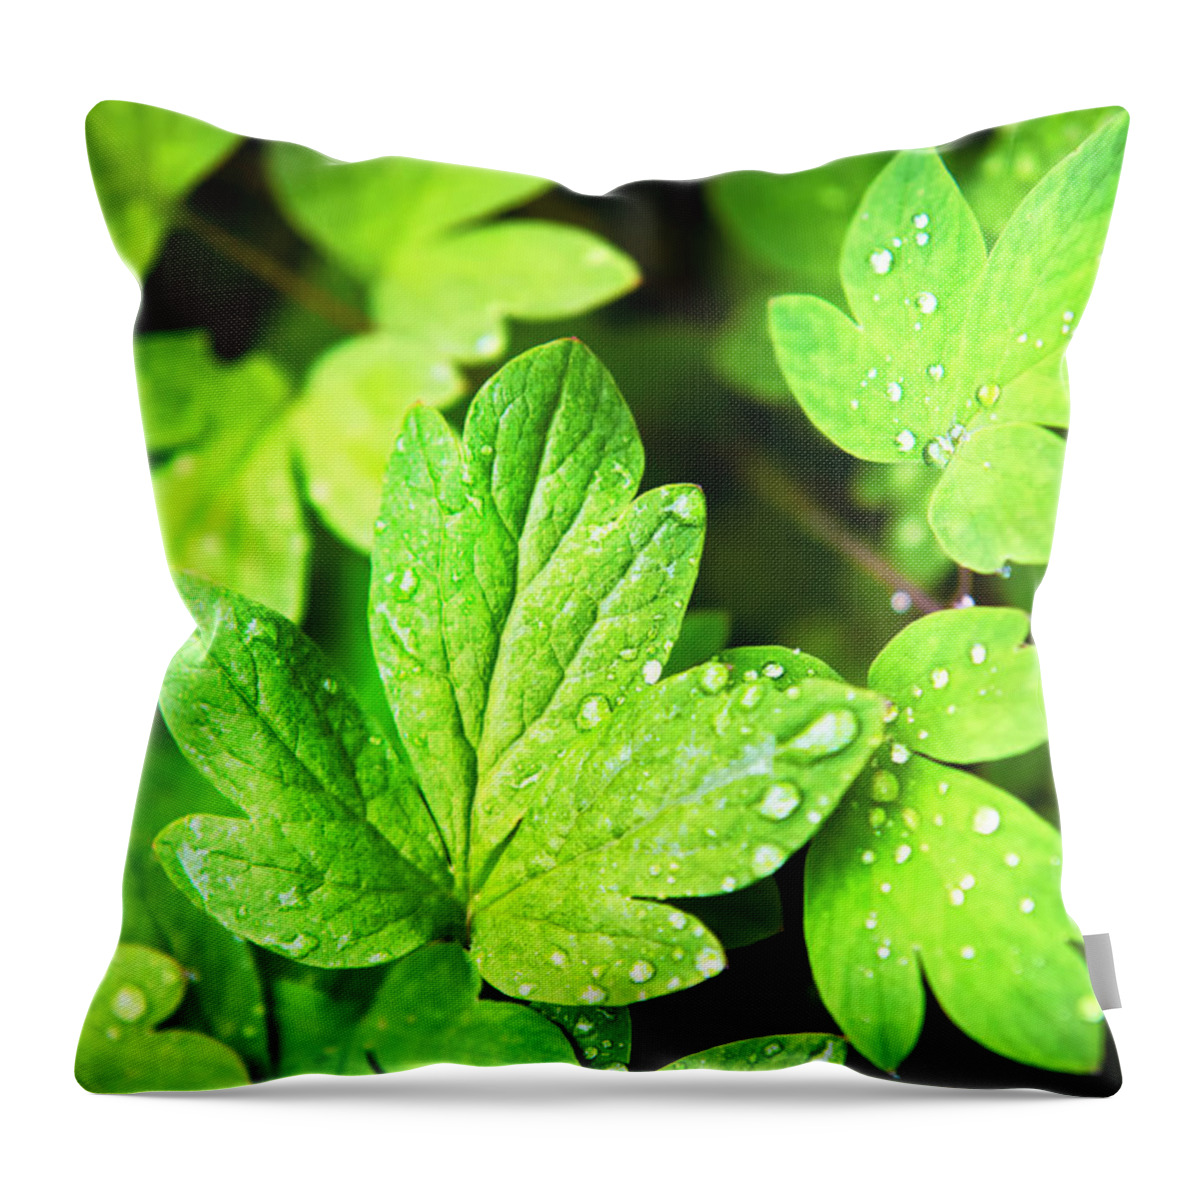 Green Leaves Throw Pillow featuring the photograph Green Leaves by Christina Rollo